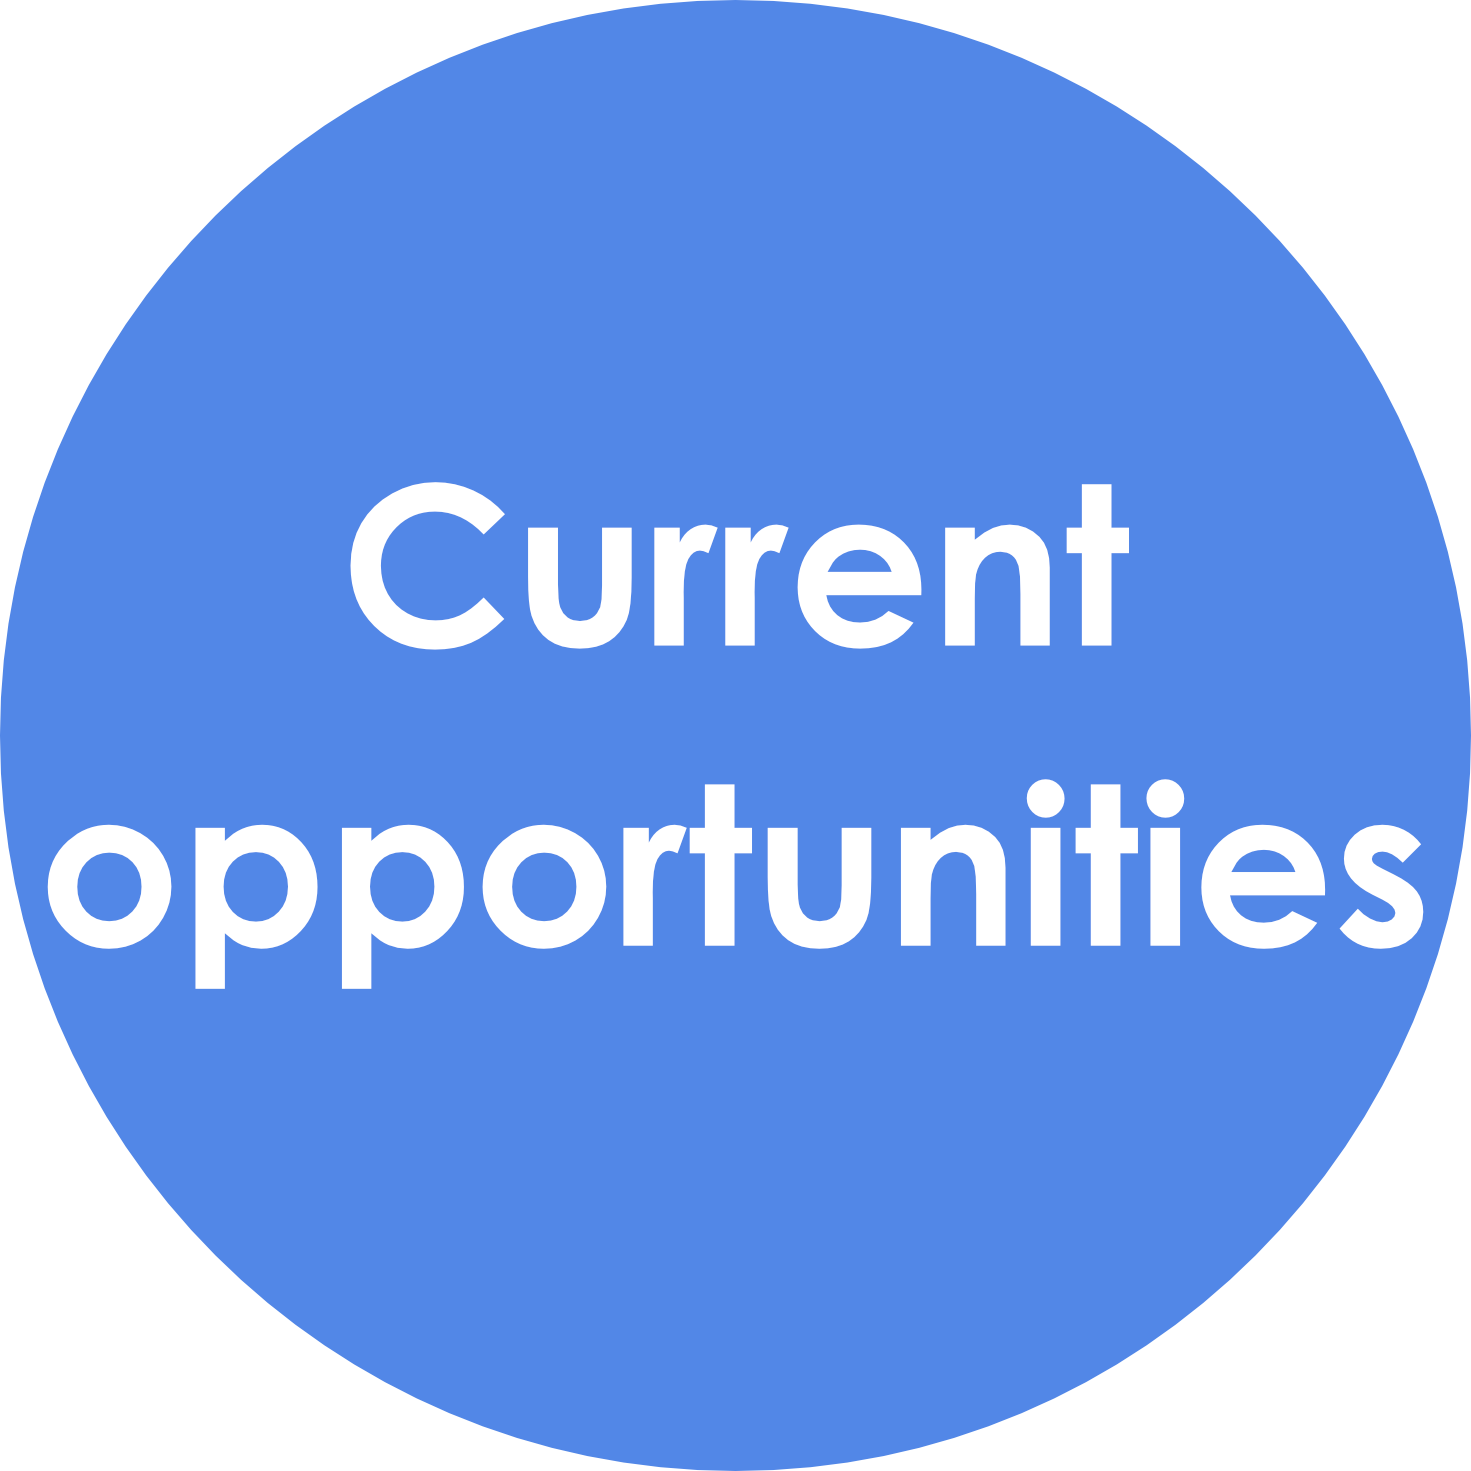 Current opportunities